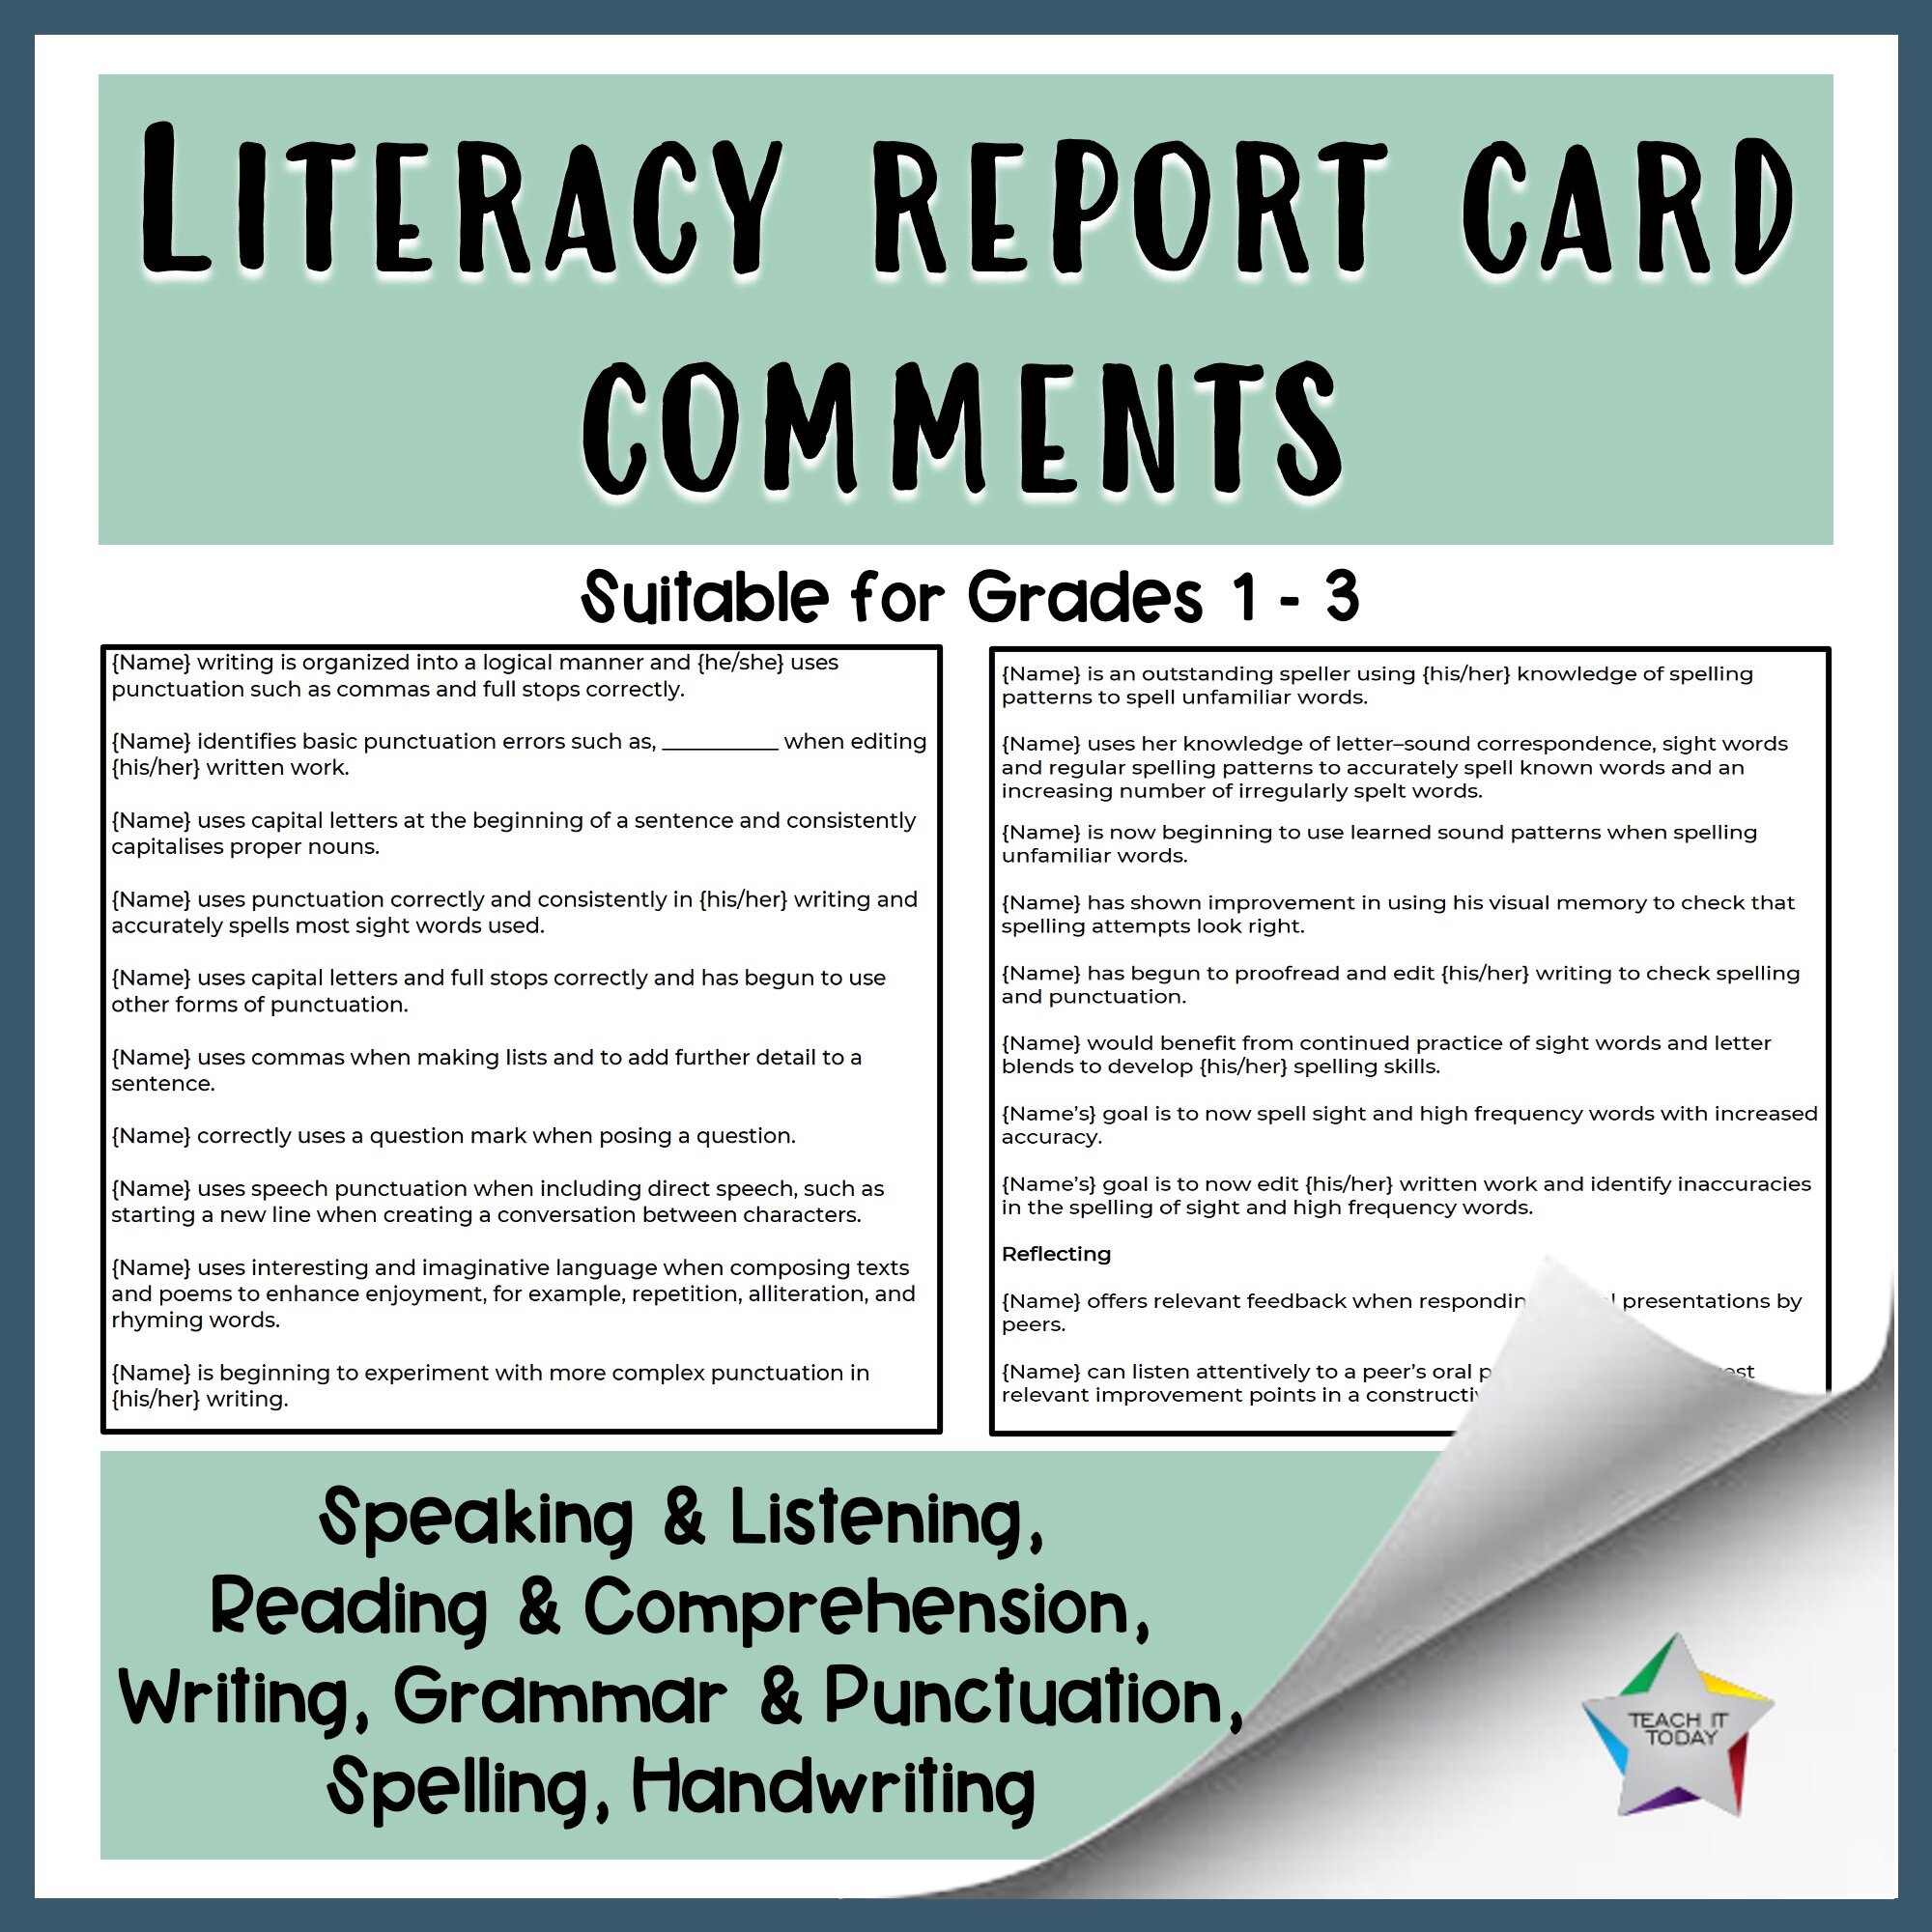 literacy-report-card-comments.jpg